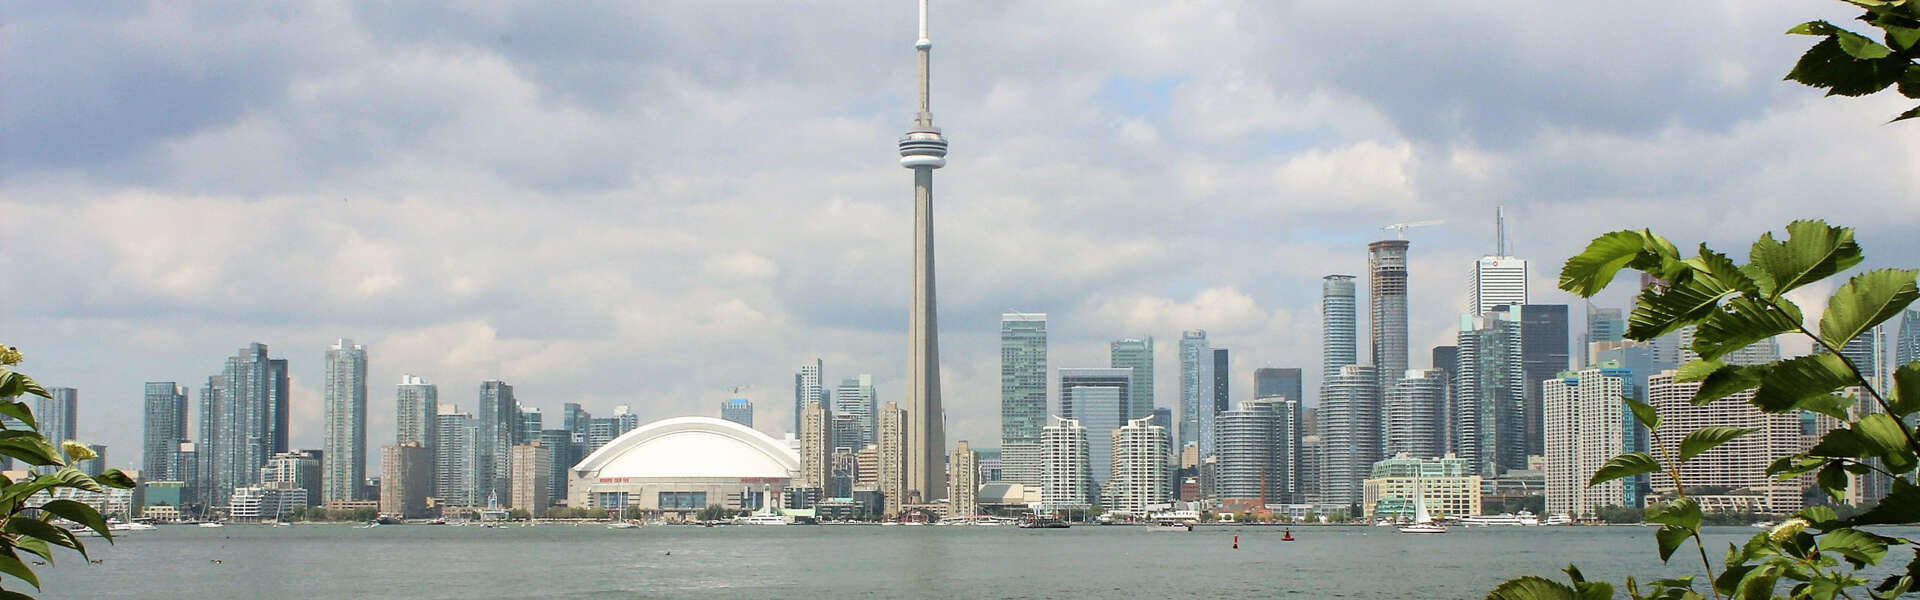 A wide angle view of the downtown toronto skyline from across teh lake